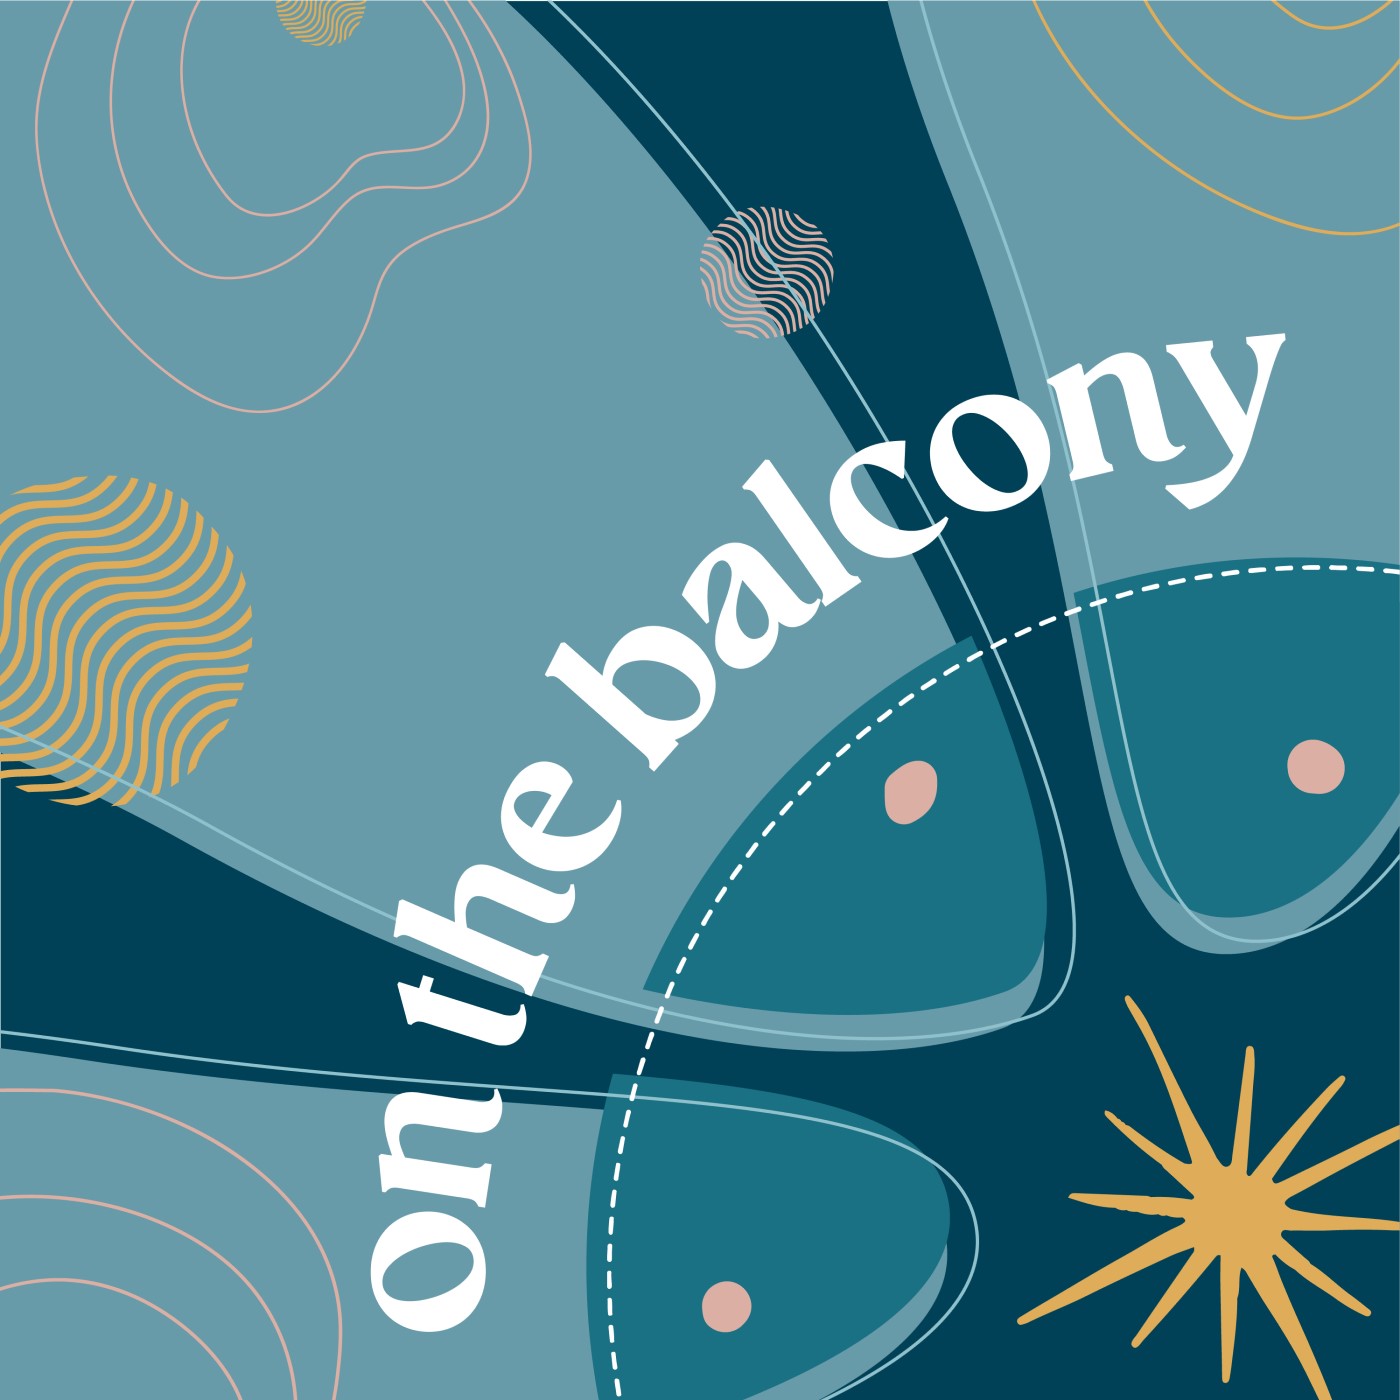 Welcome to On the Balcony - Values and Leadership